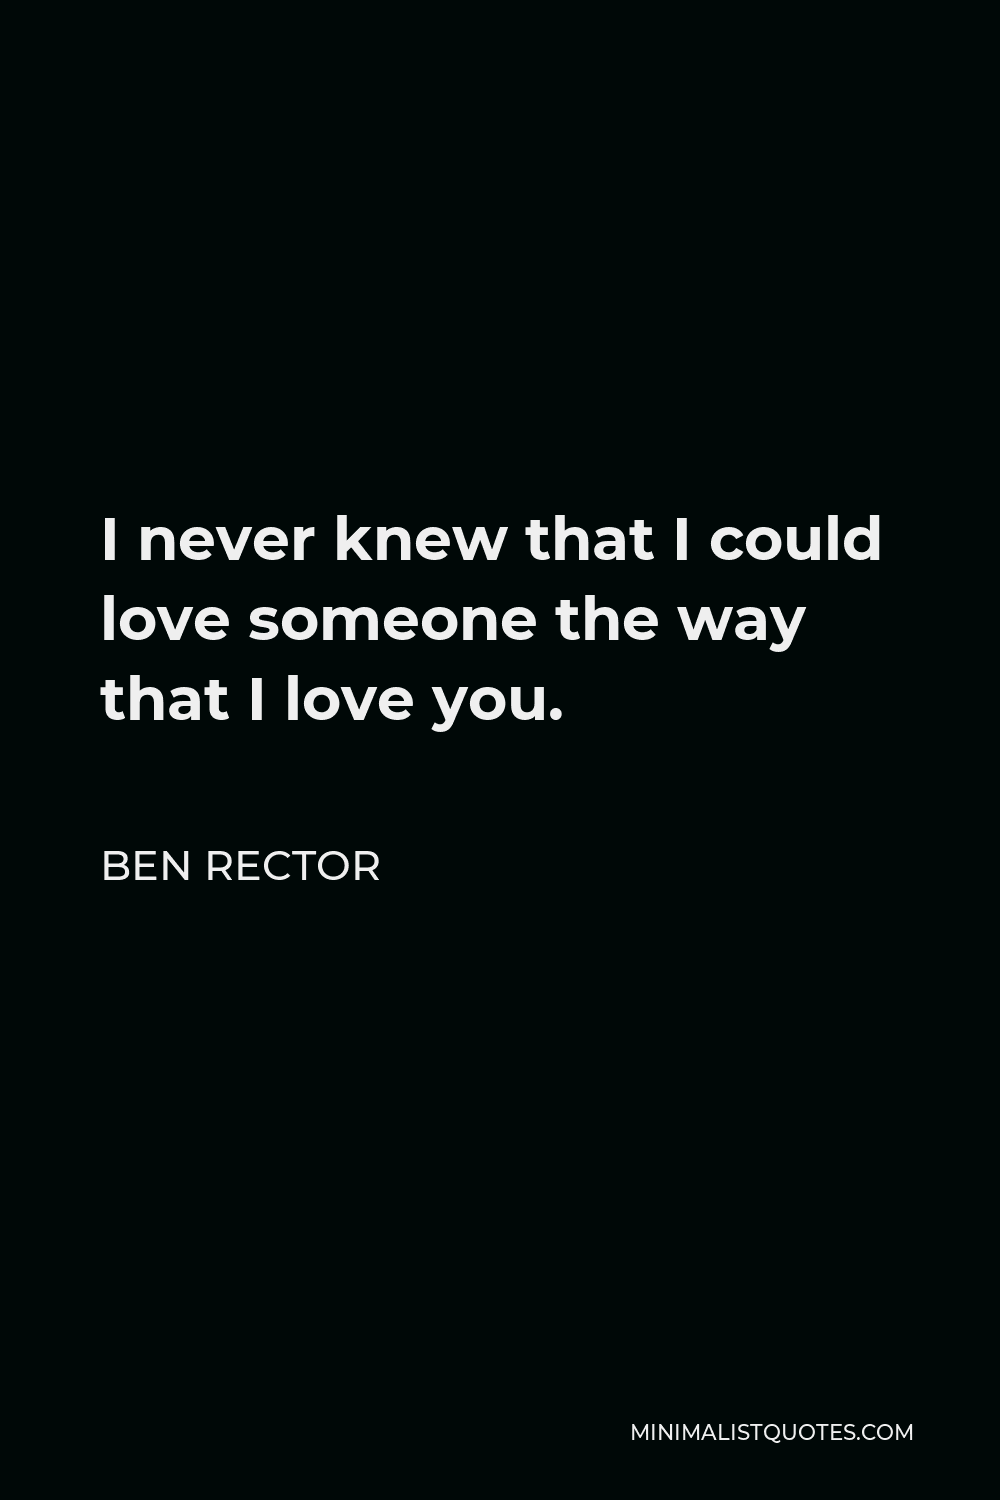 Ben Rector Quote - I never knew that I could love someone the way that I love you.